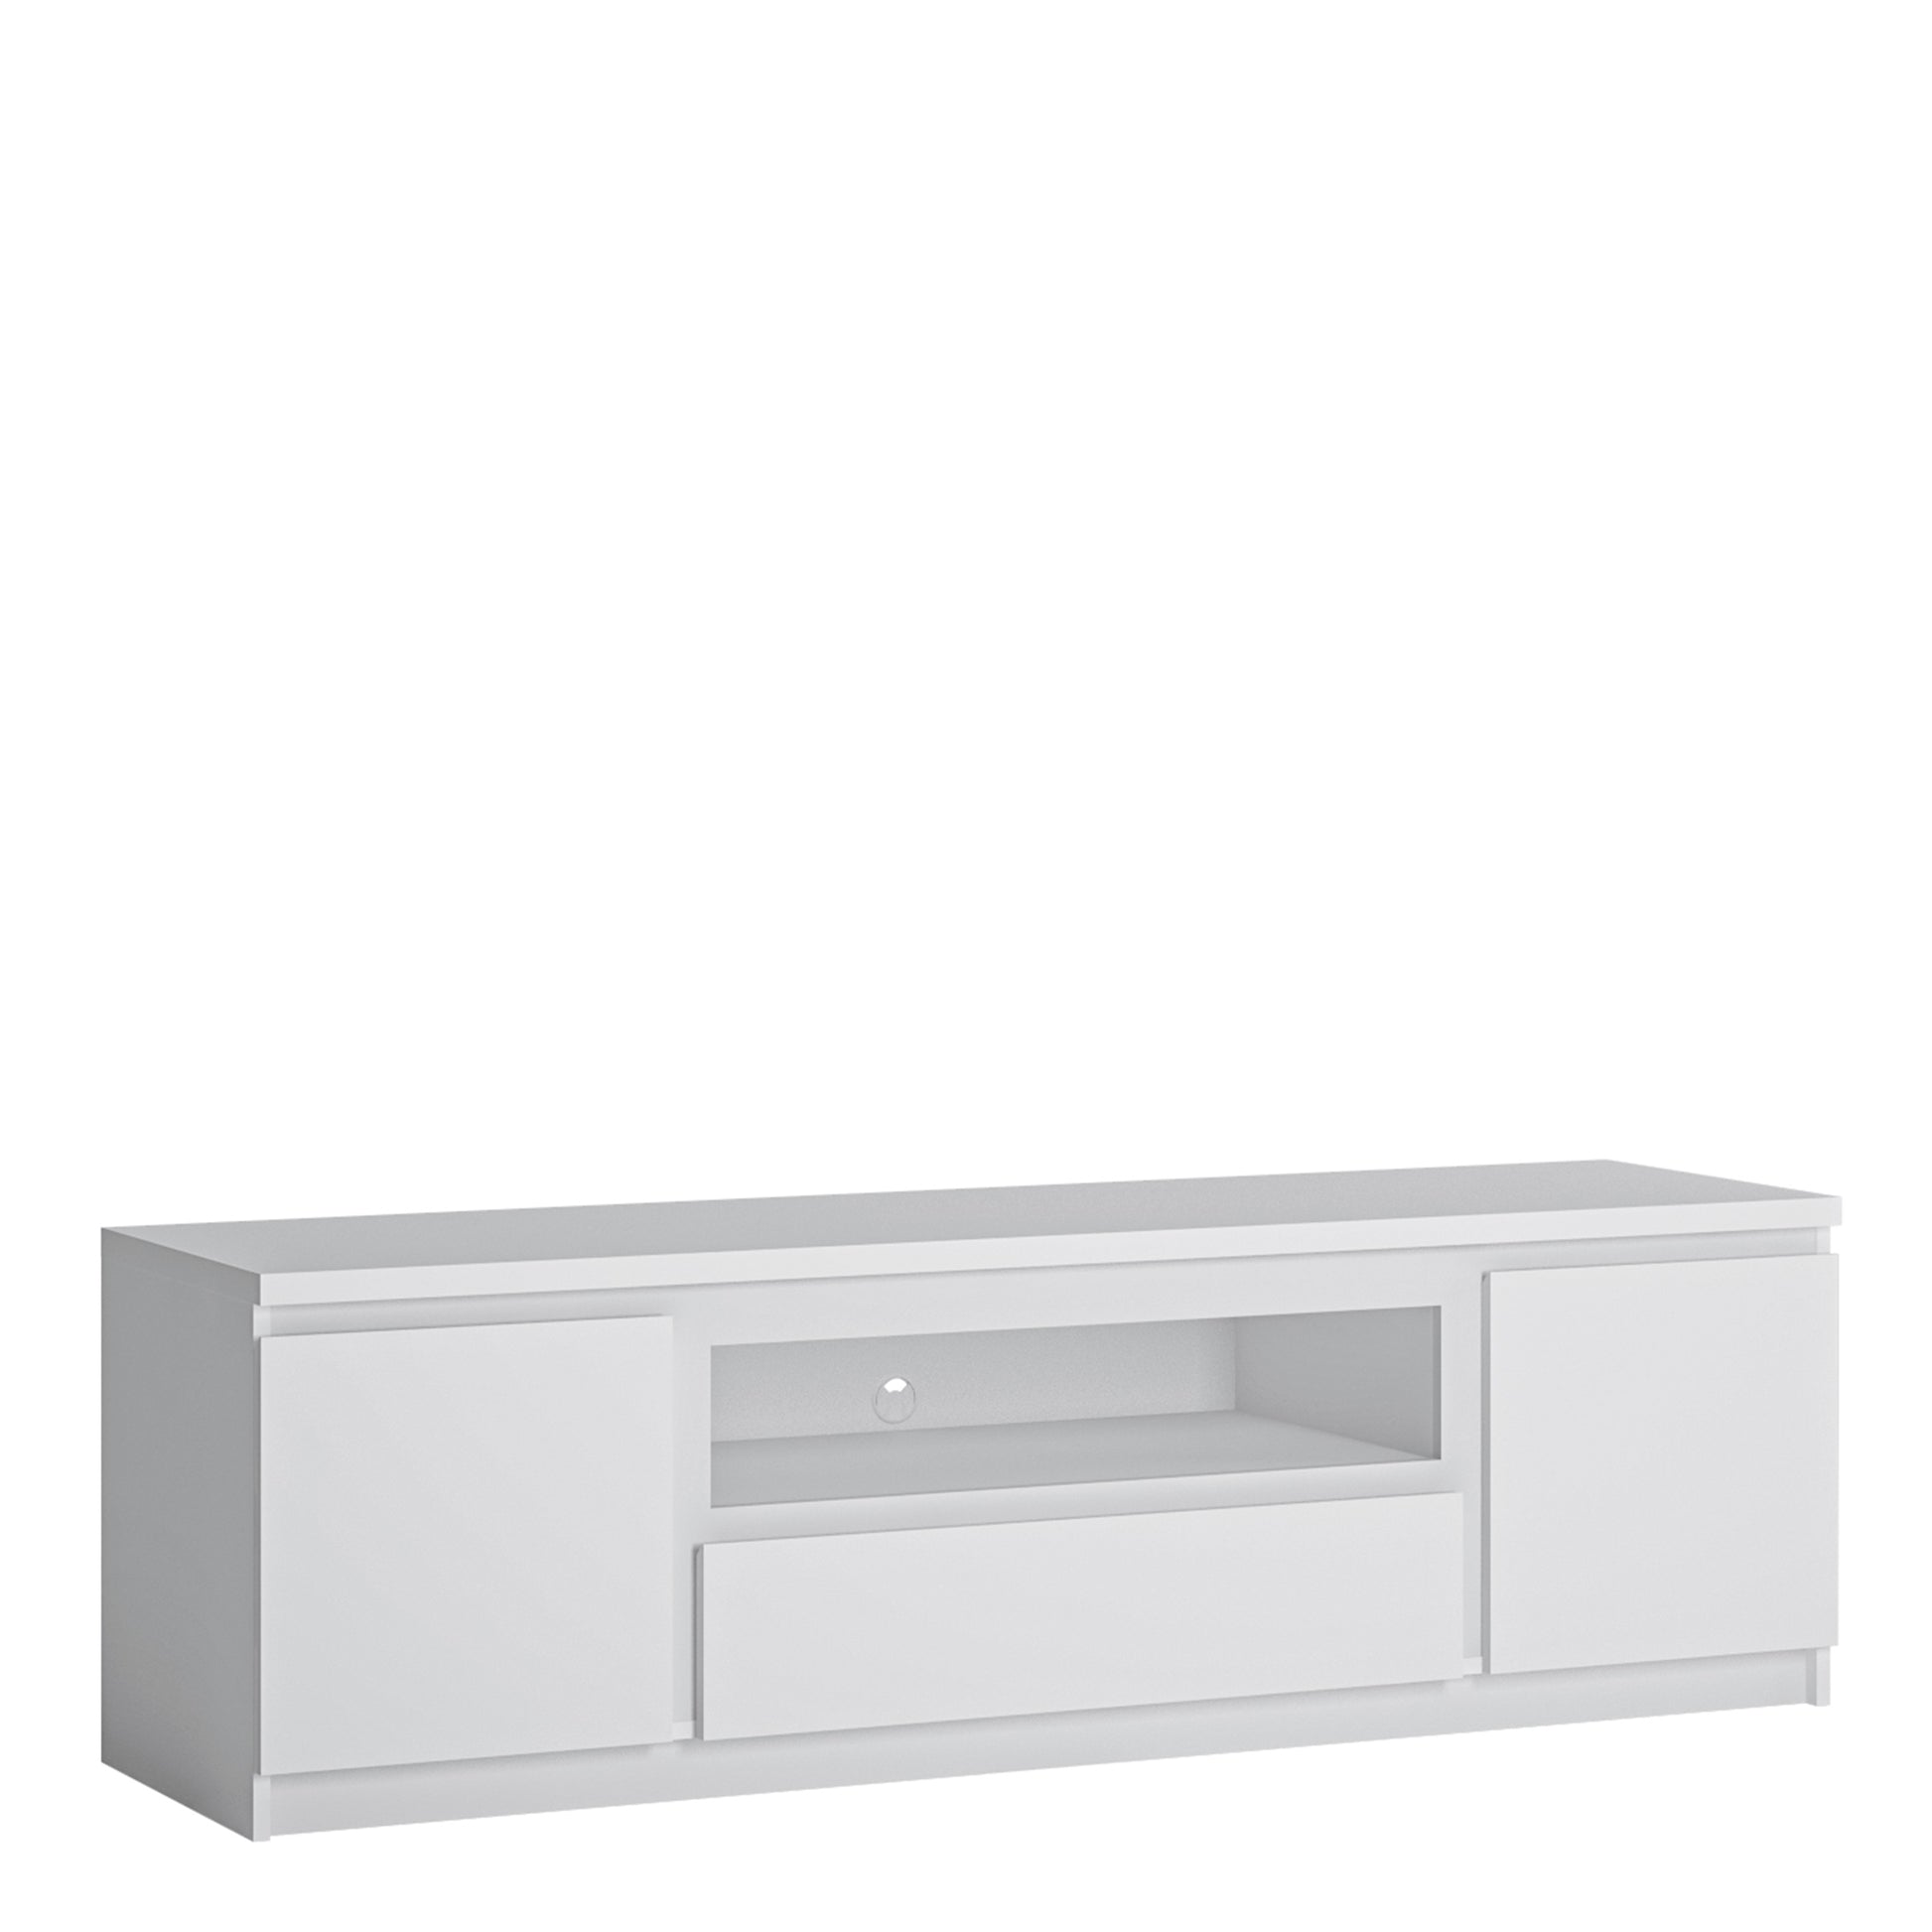 Fribo White Fribo 2 door 1 drawer 166 cm wide TV cabinet in White